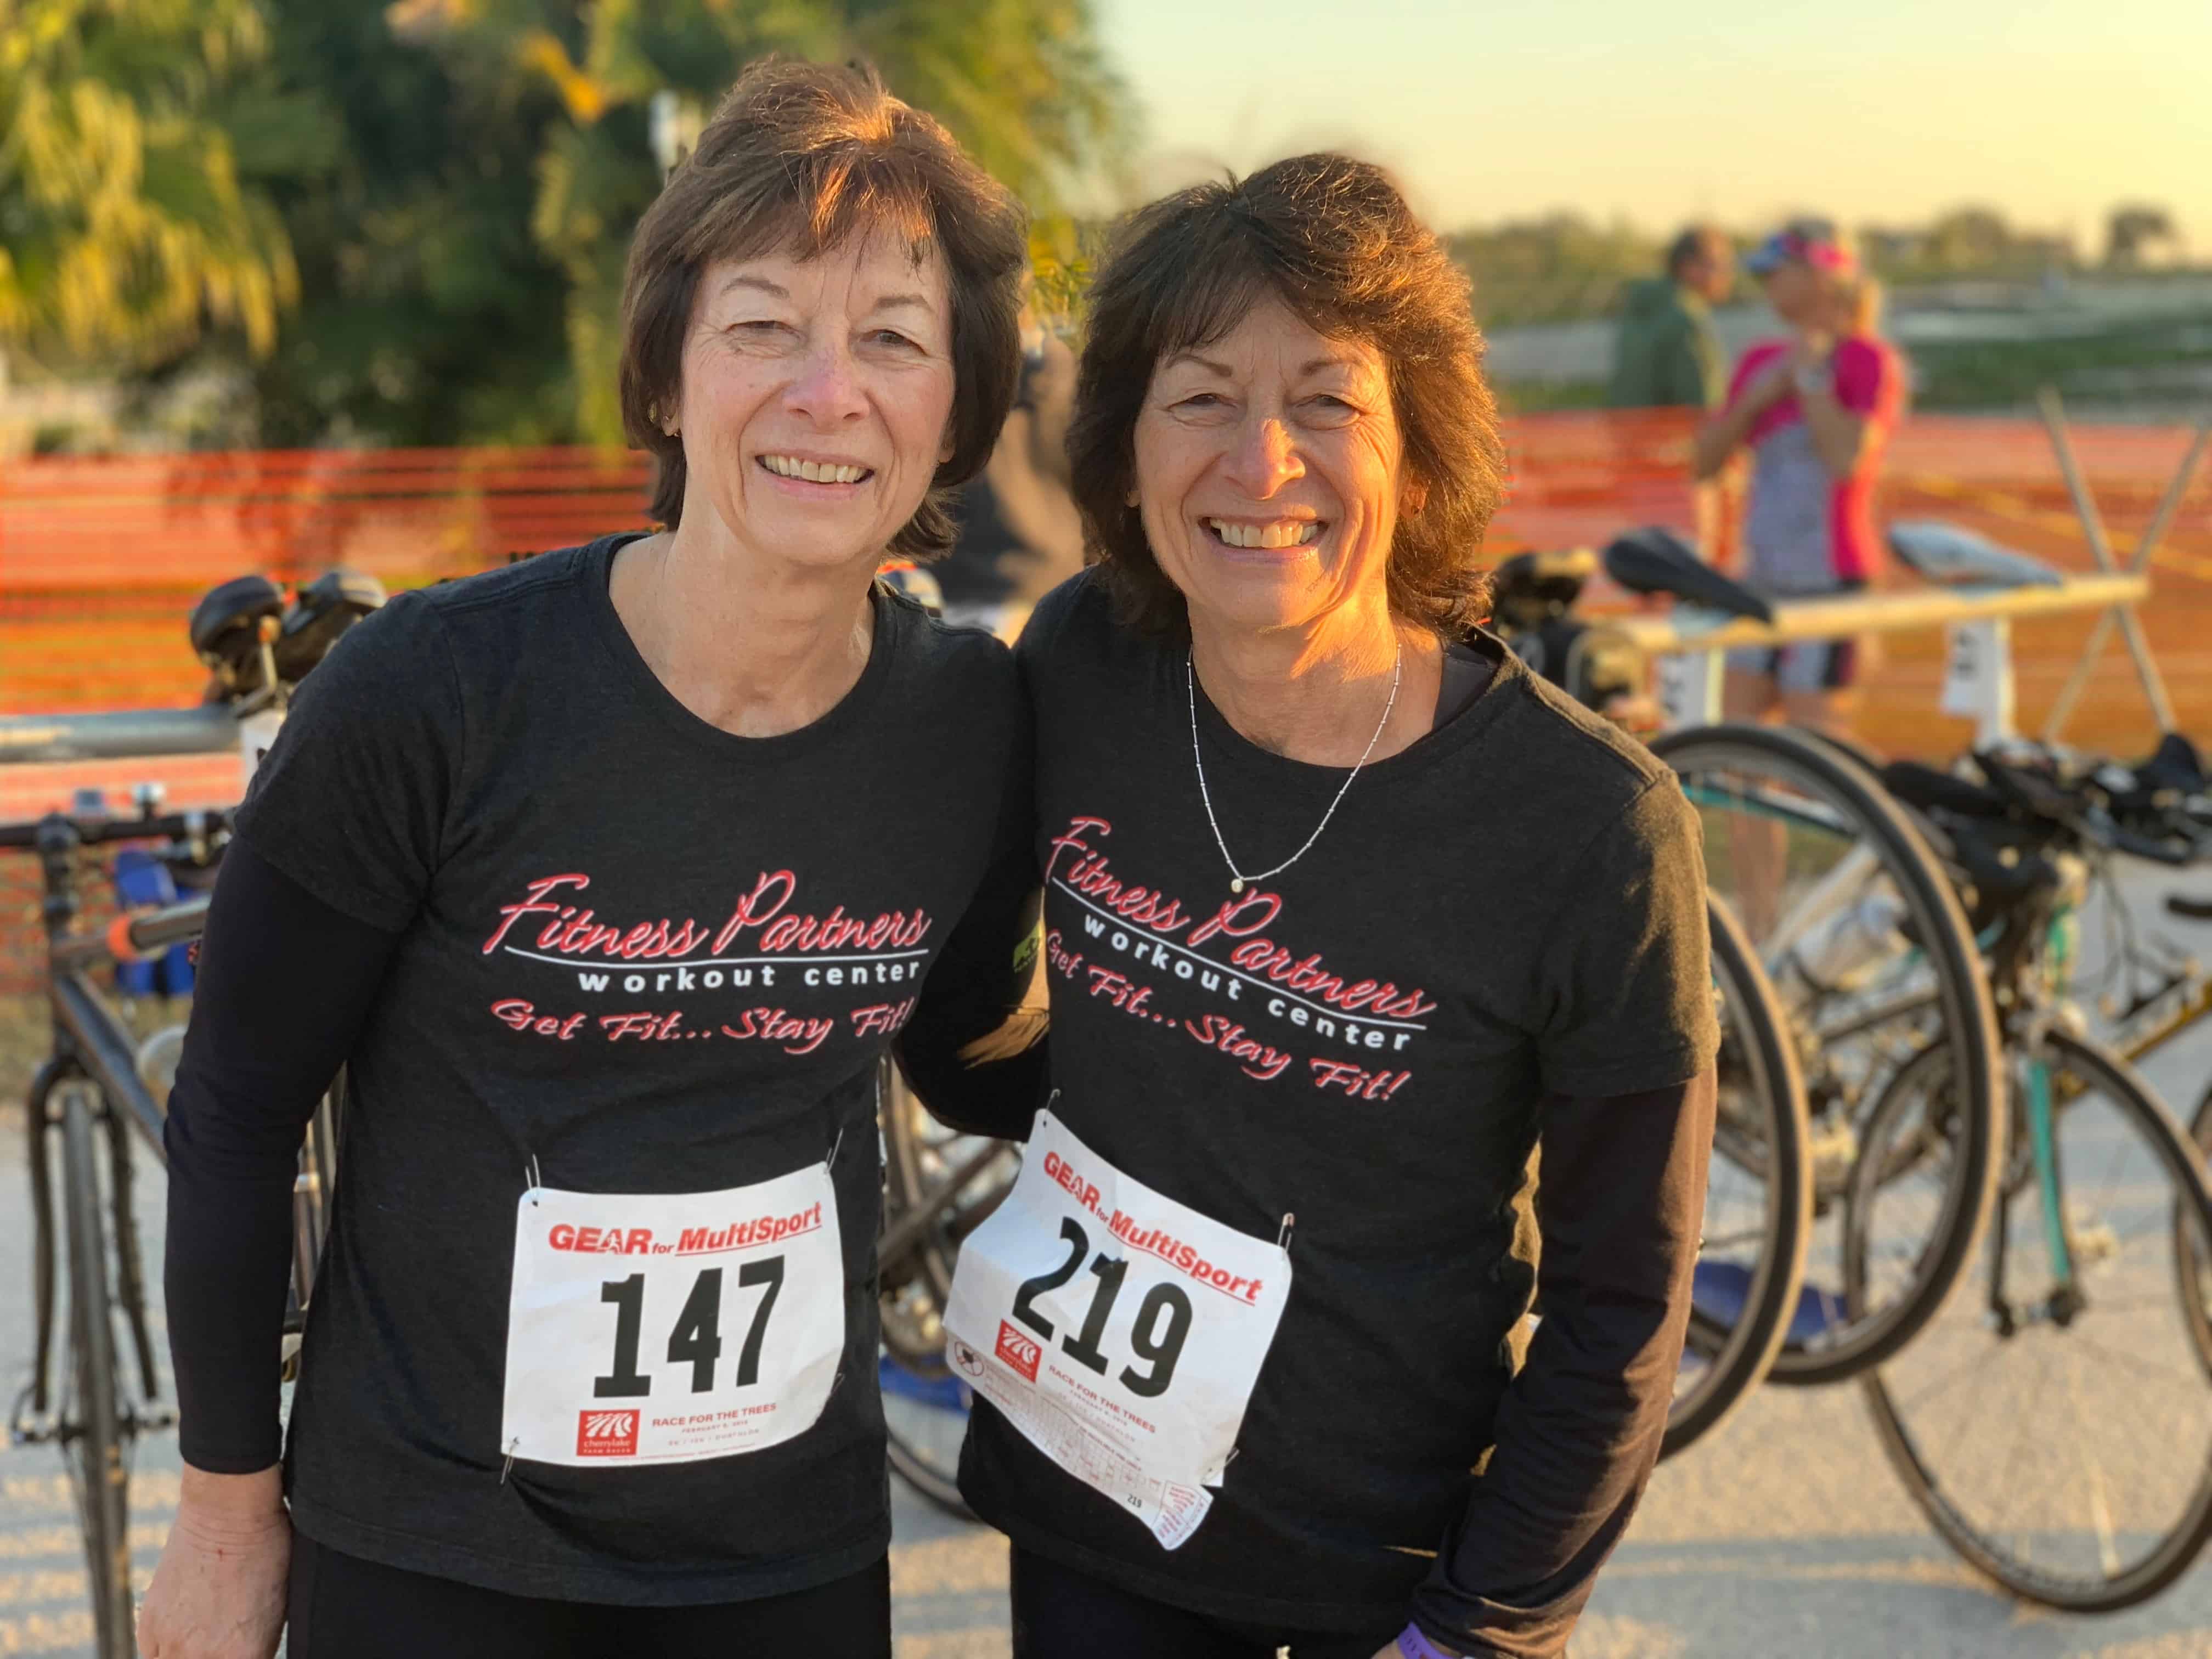 Two women smile after a completed race.